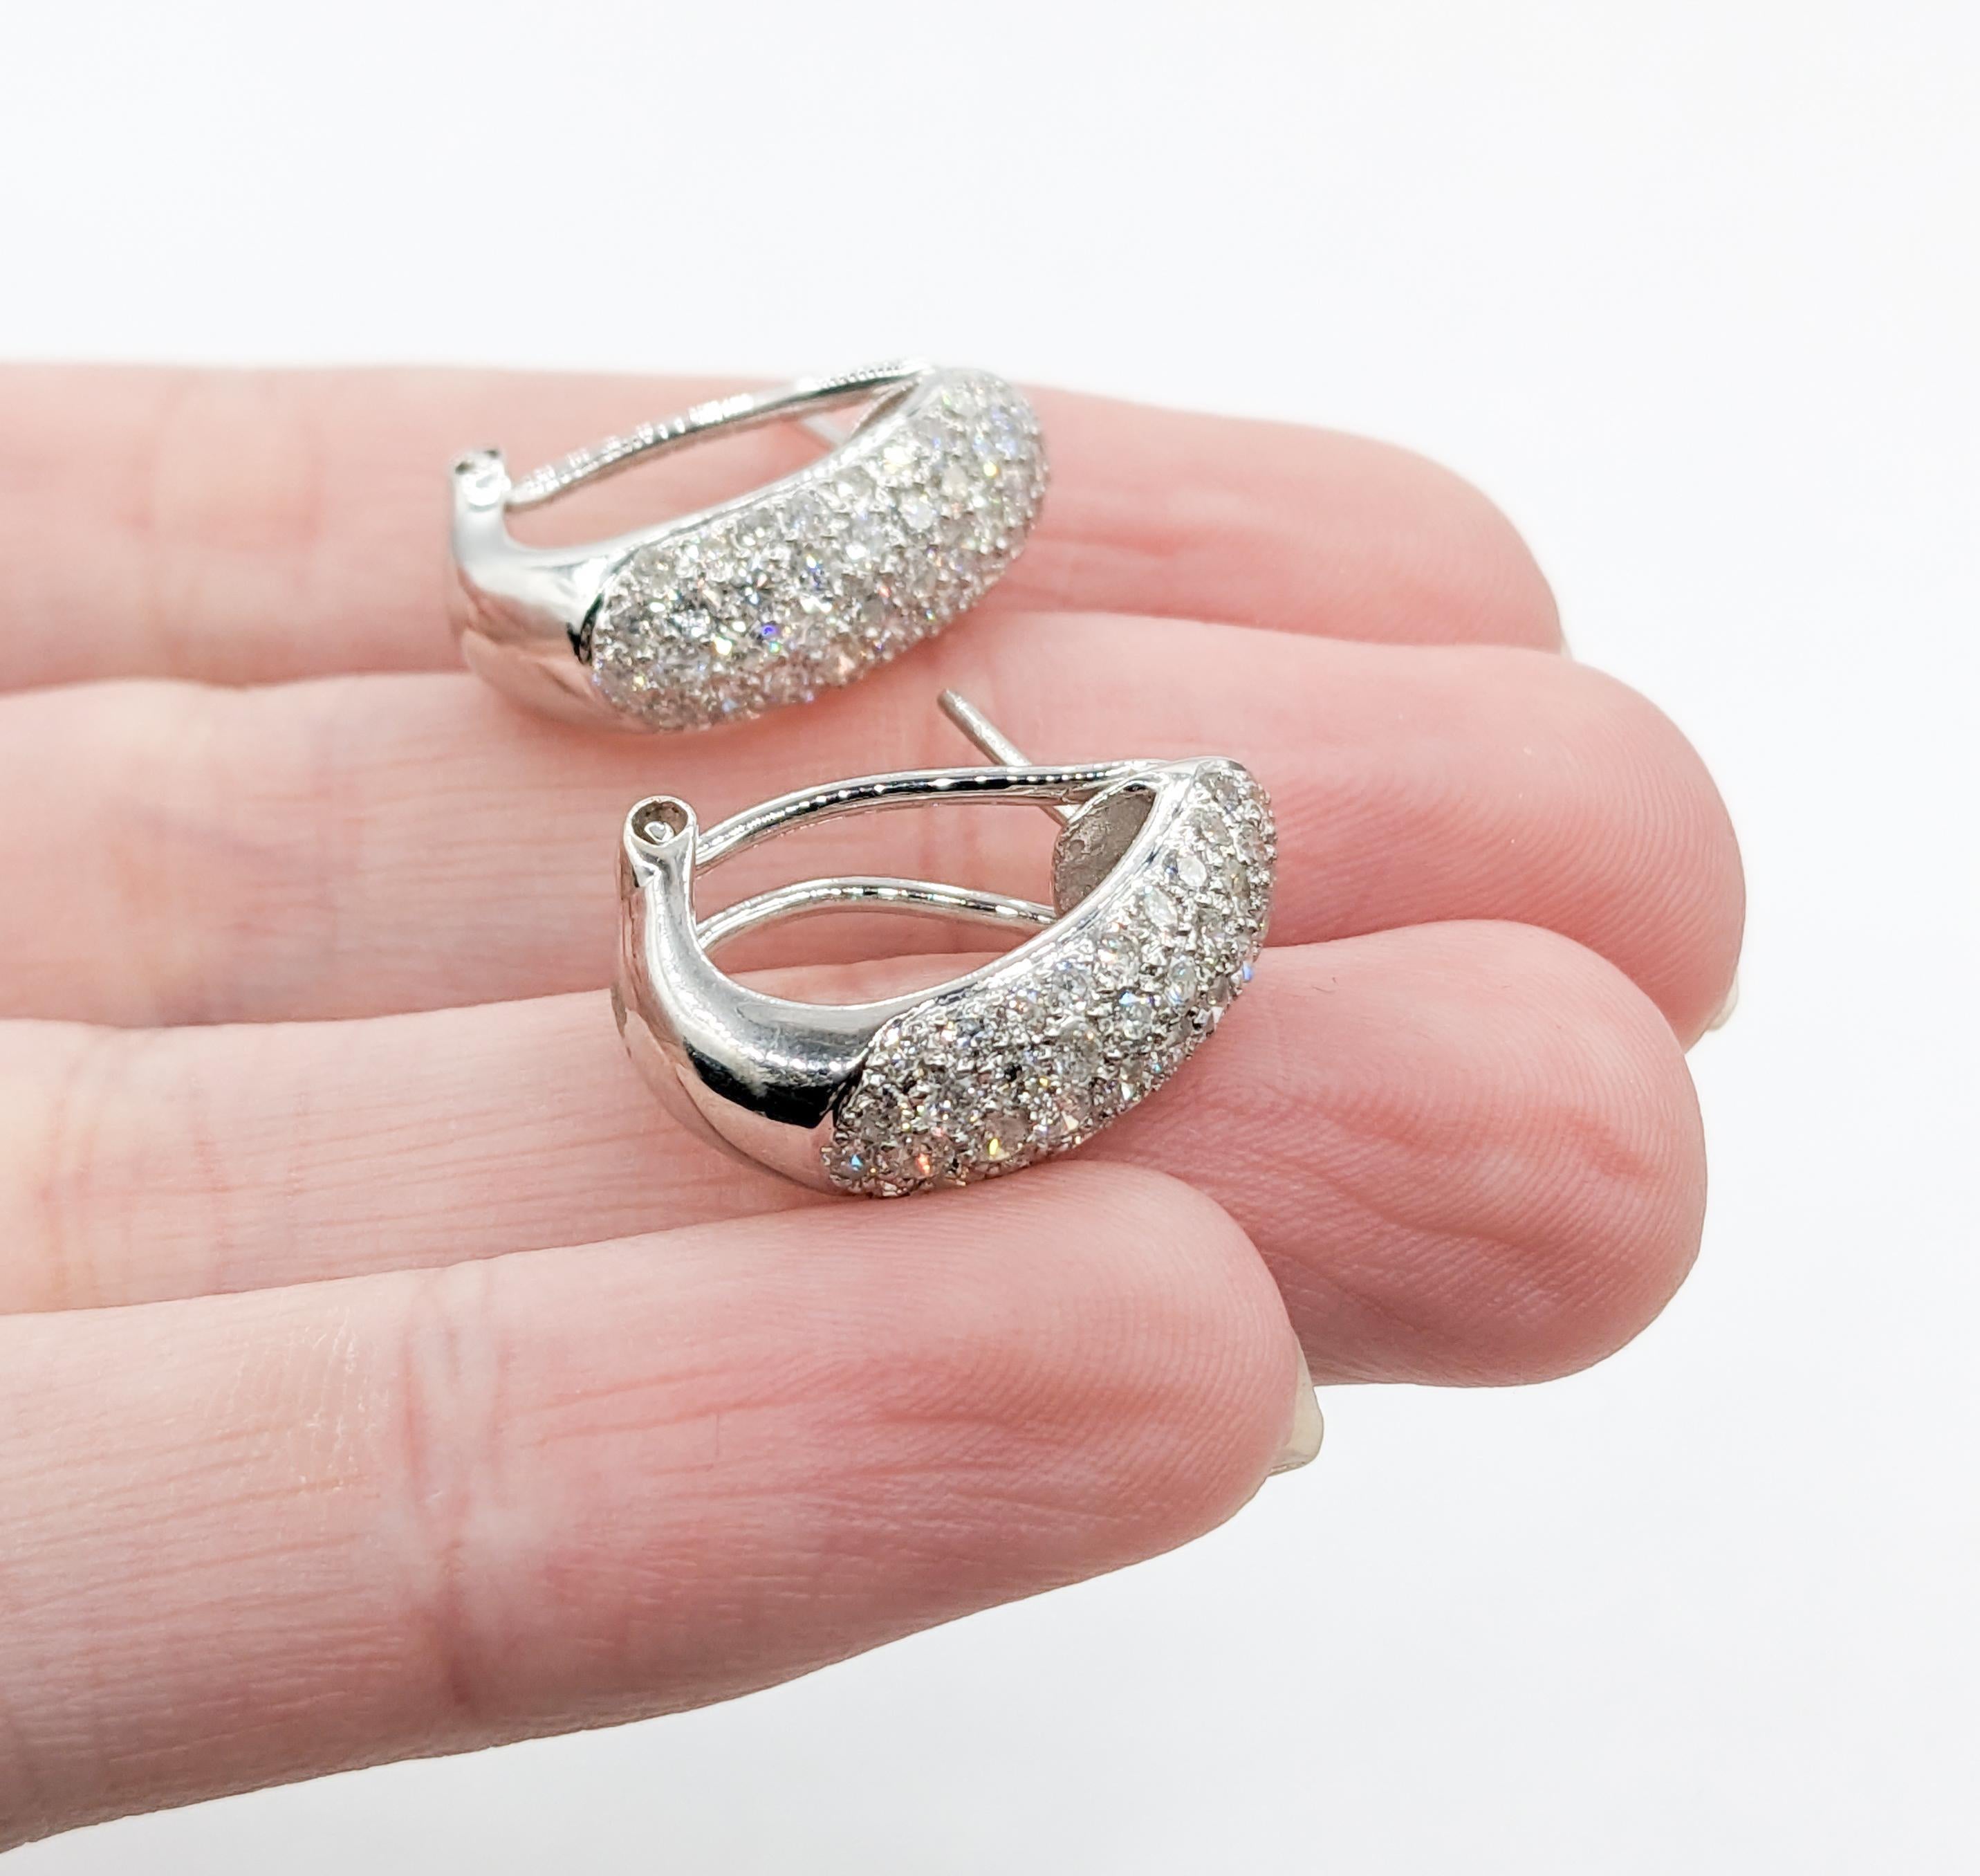 Vintage Pave 2ctw Diamond Huggie Hoops in White Gold

Introducing these exquisite Half Hoop Huggie Style earrings, encrusted in shimmering diamonds. Crafted in gleaming 18k white gold, they feature a stunning ensemble of 2.00 carats of round